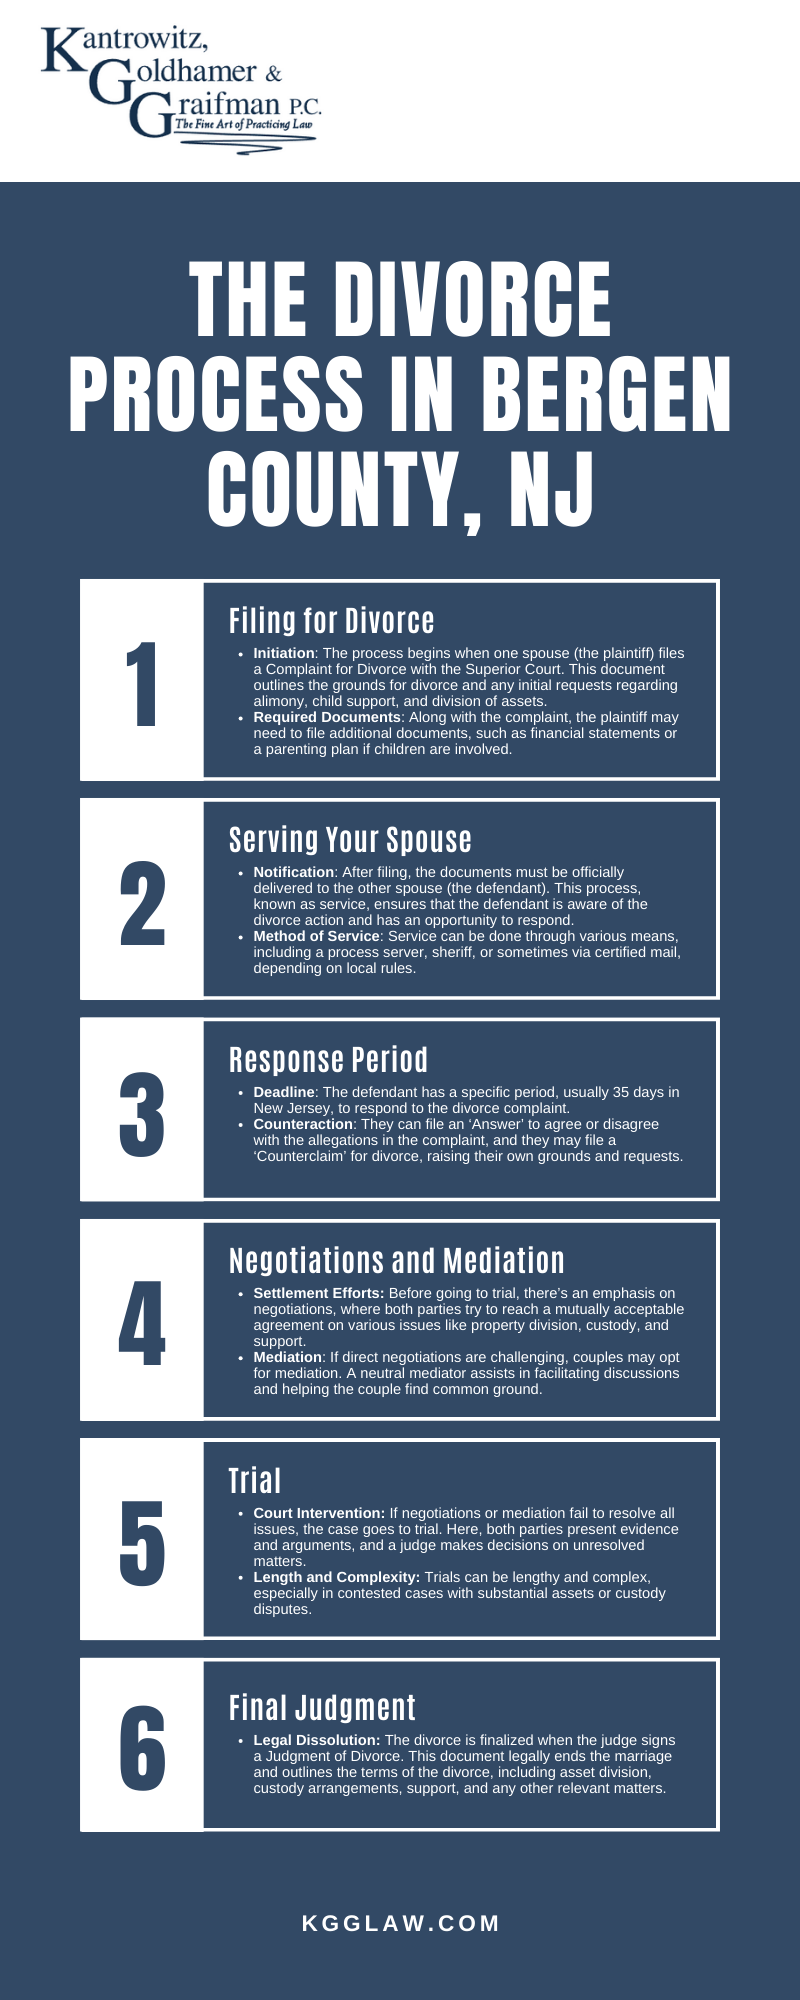 The Divorce Process In Bergen County, NJ Infographic